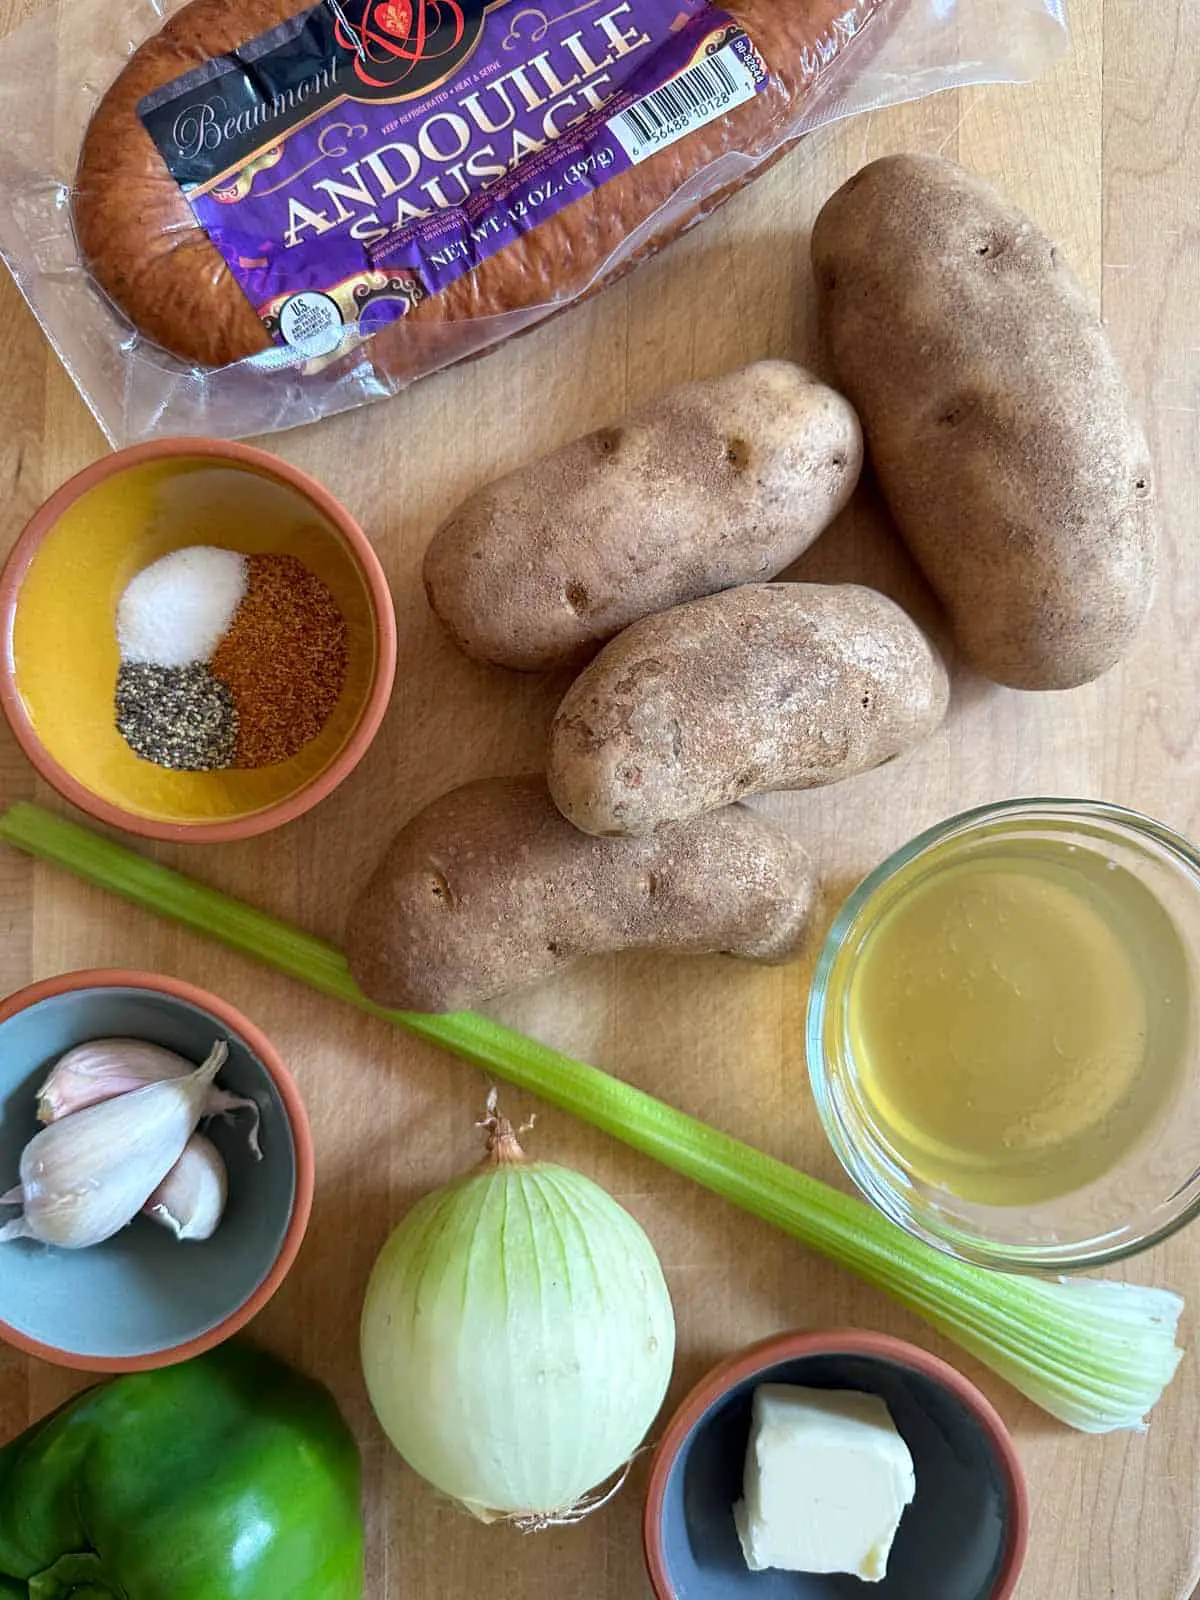 A package of Andouille Sausage, 4 russet potatoes, small bowls with seasonings, garlic, butter, and chicken broth. There is also a celery stalk, an onion, and a green bell pepper.